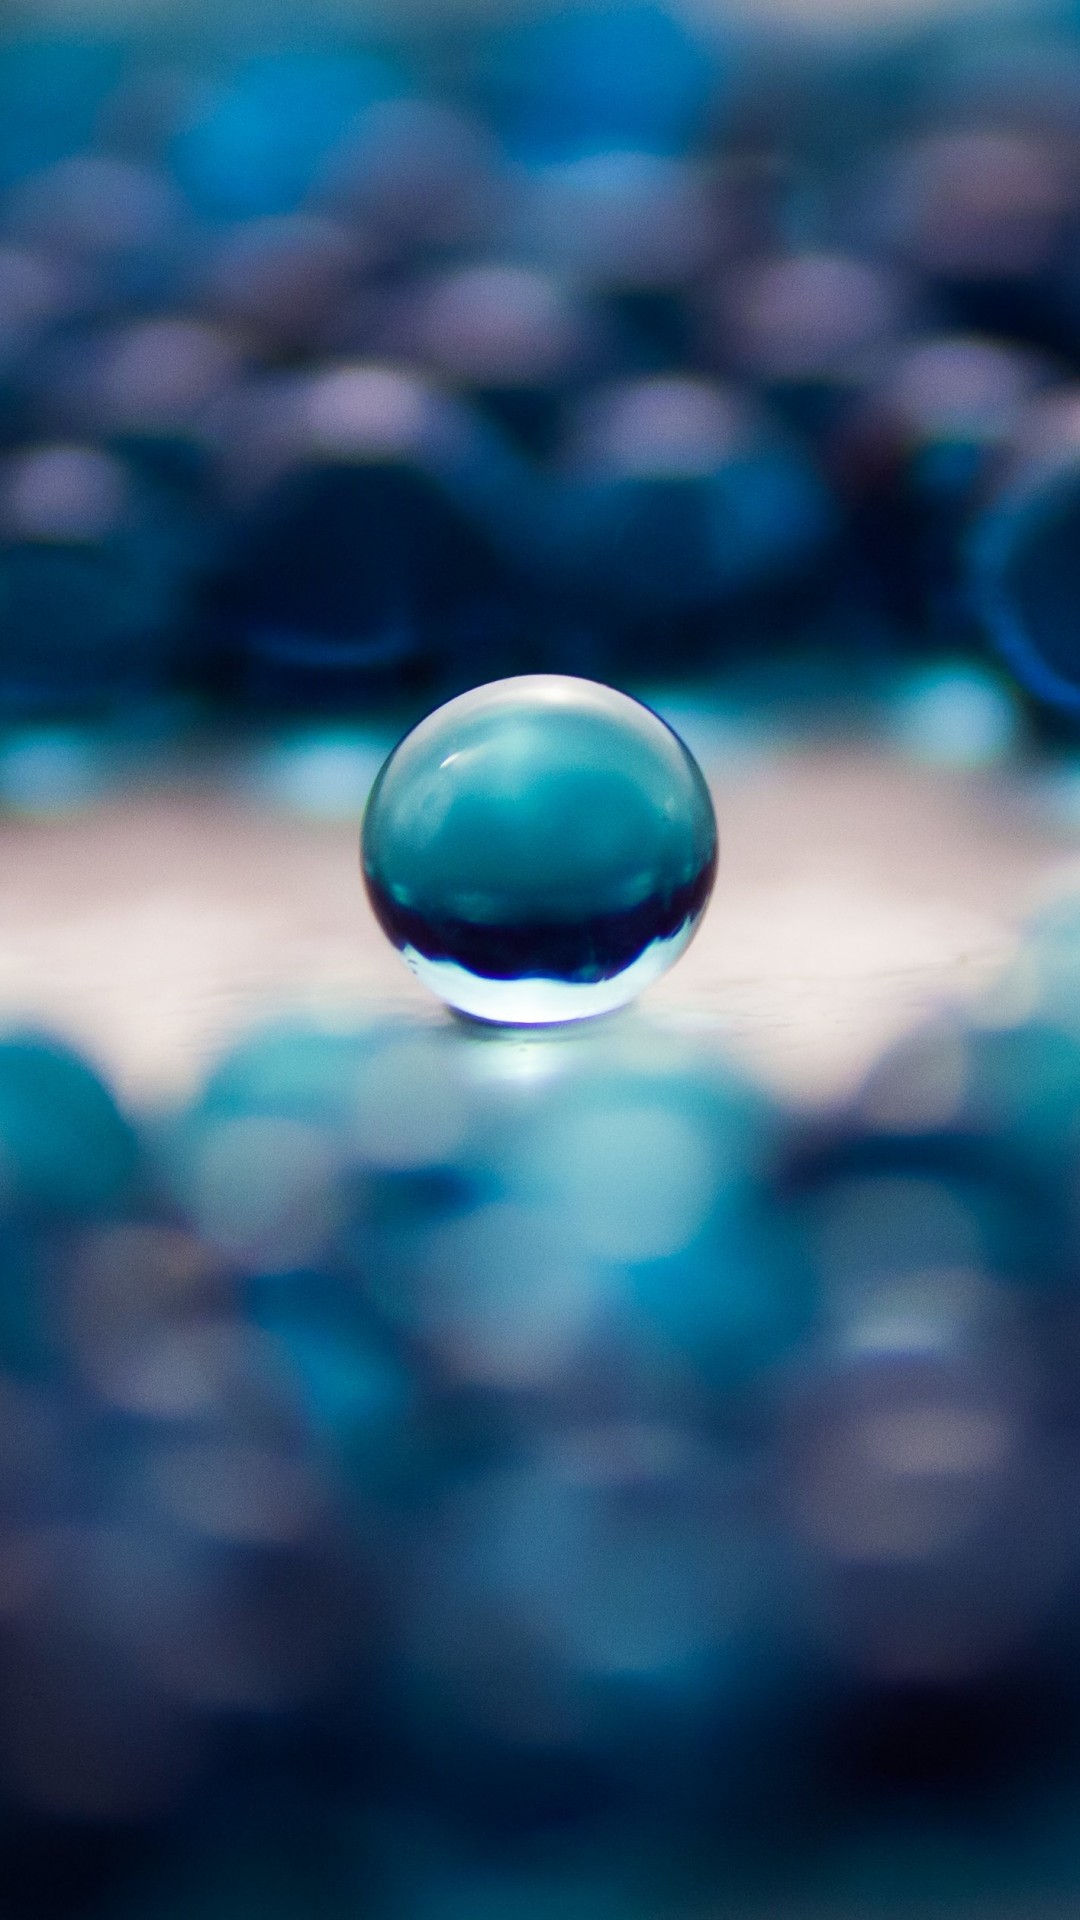 Water Balls Wallpaper for SONY Xperia Z3